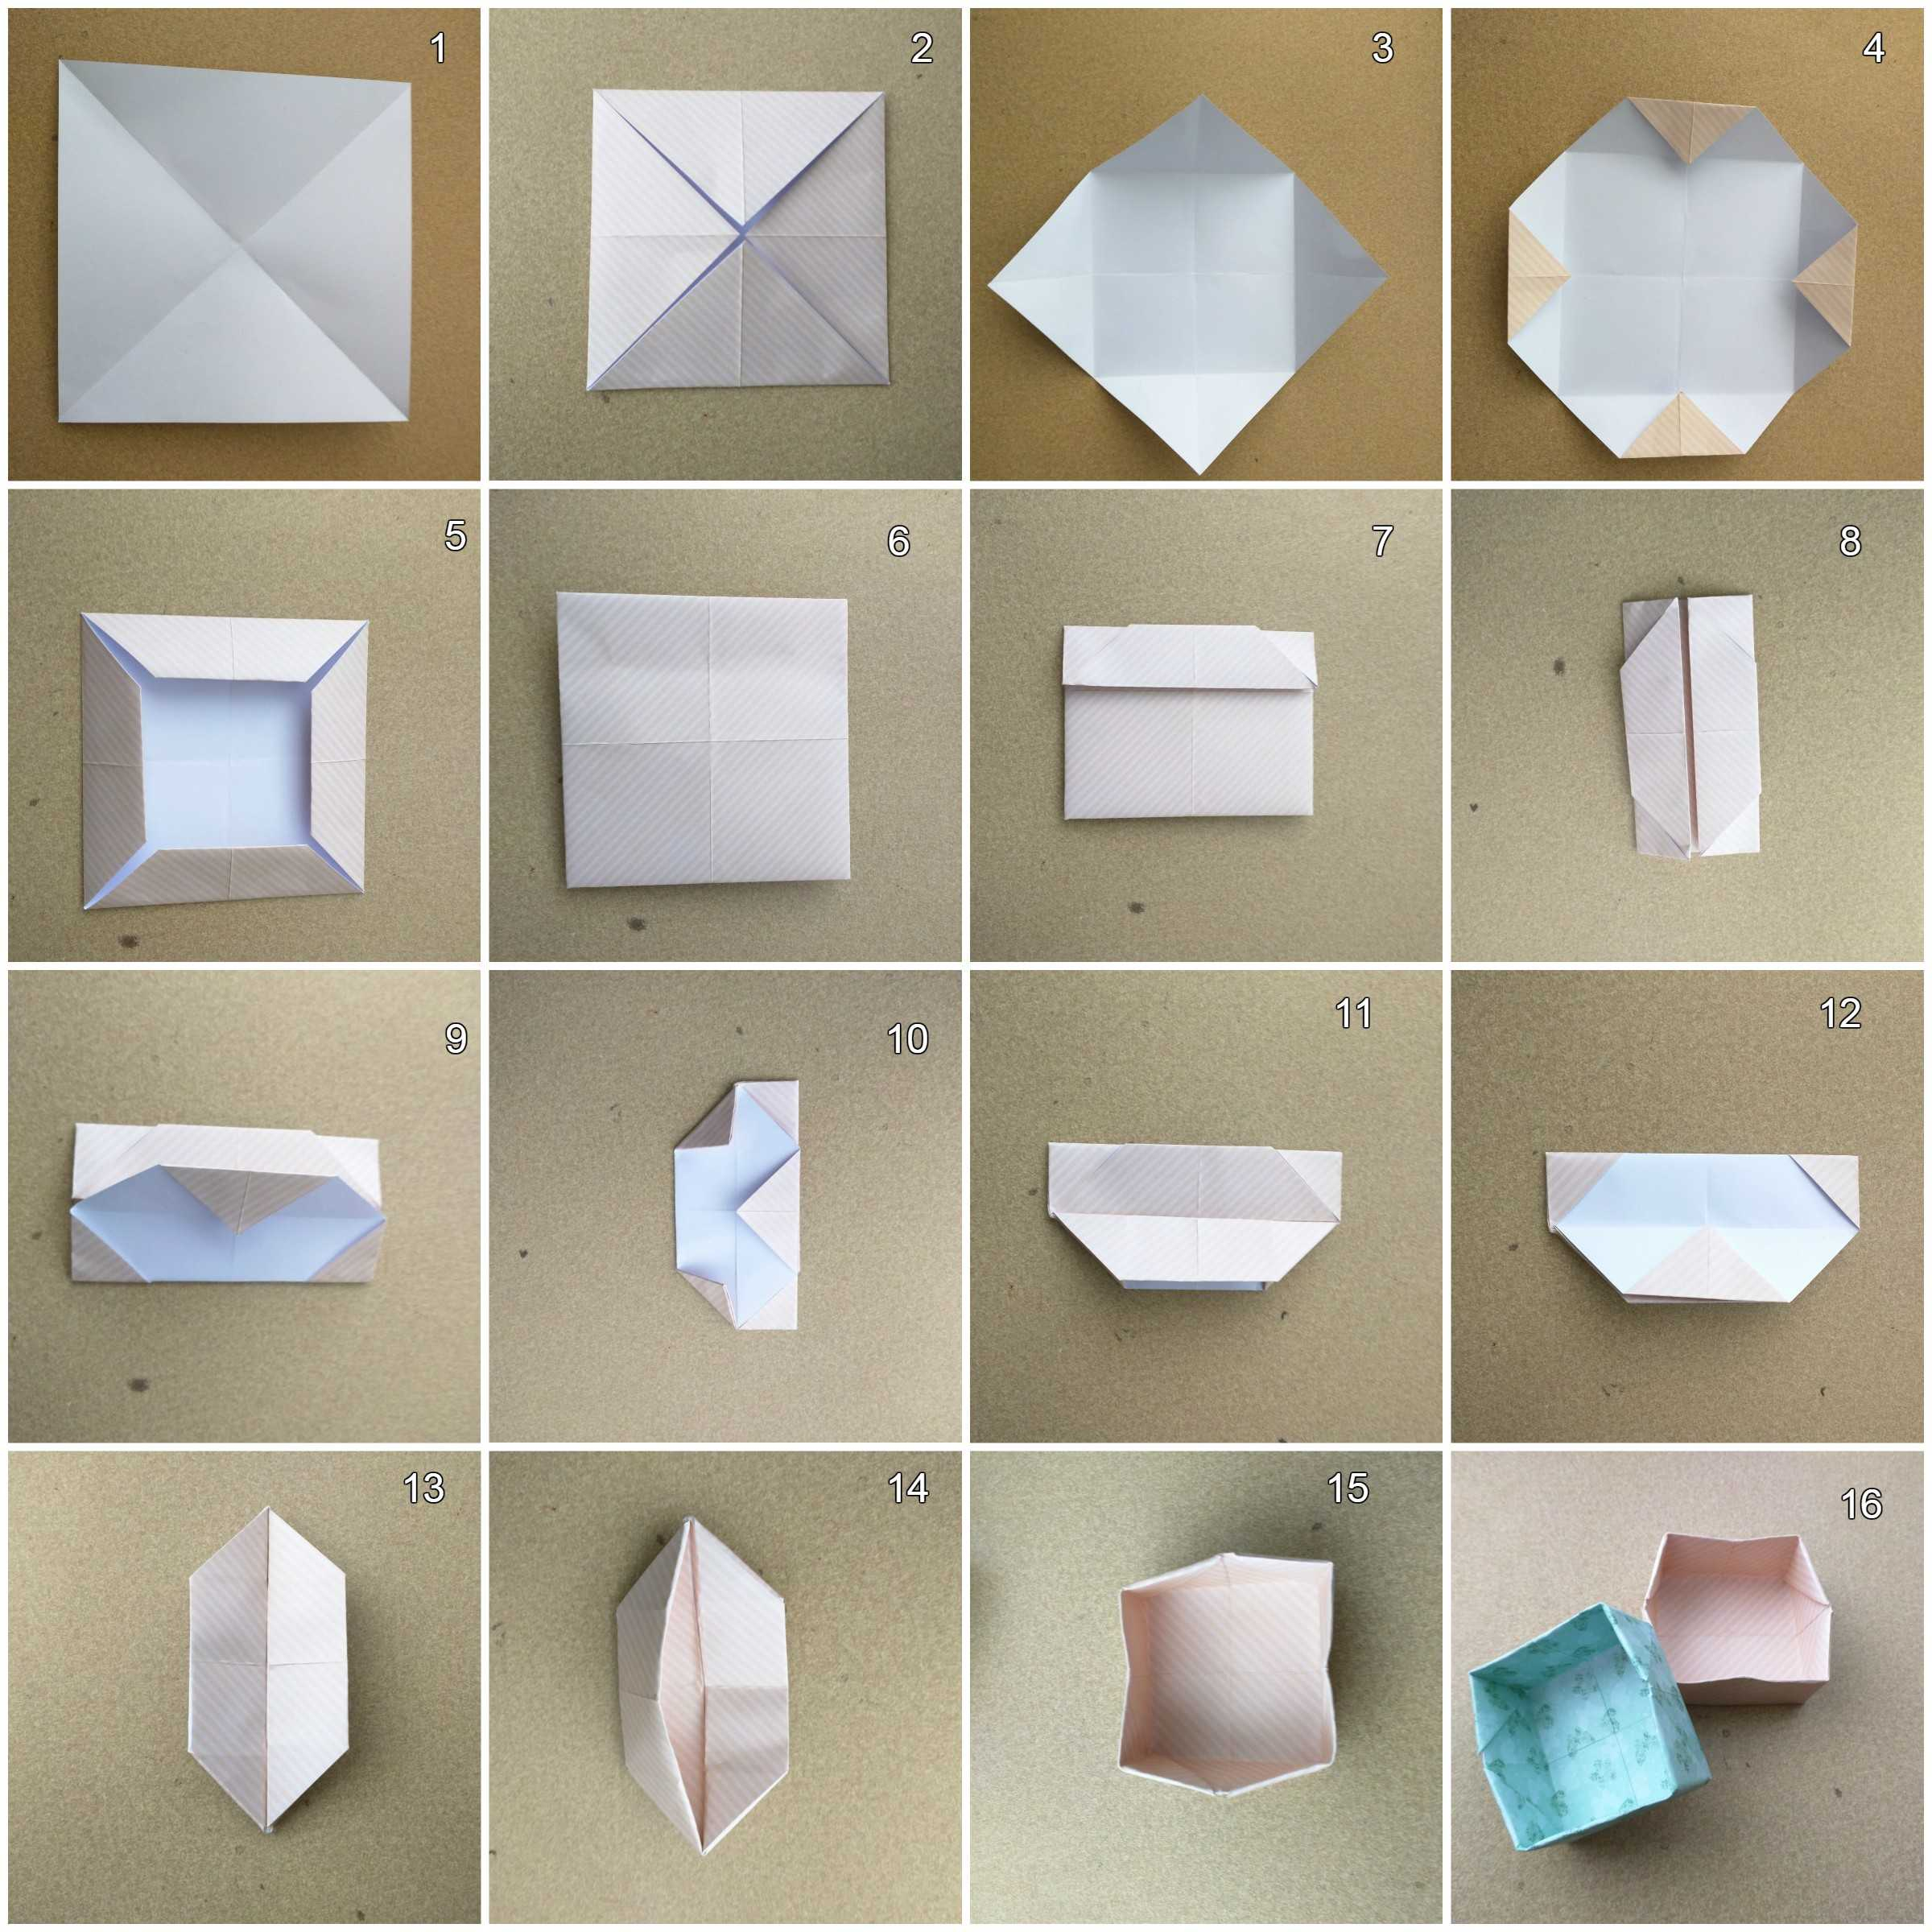 How To Make Easy Origami Box How To Make Origami Box